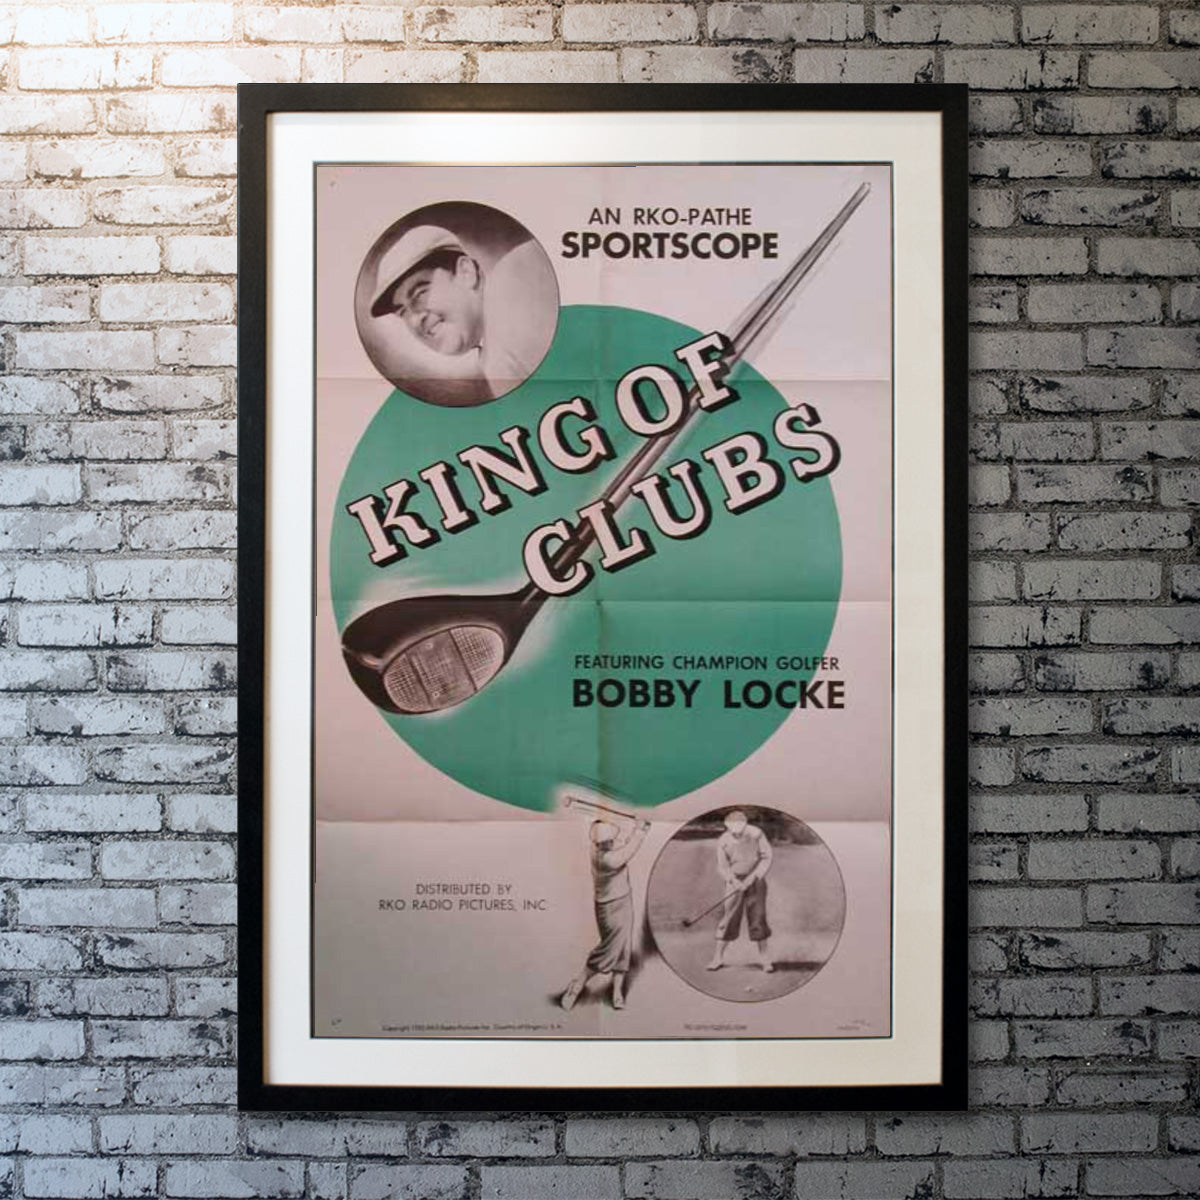 King of Clubs (1952)